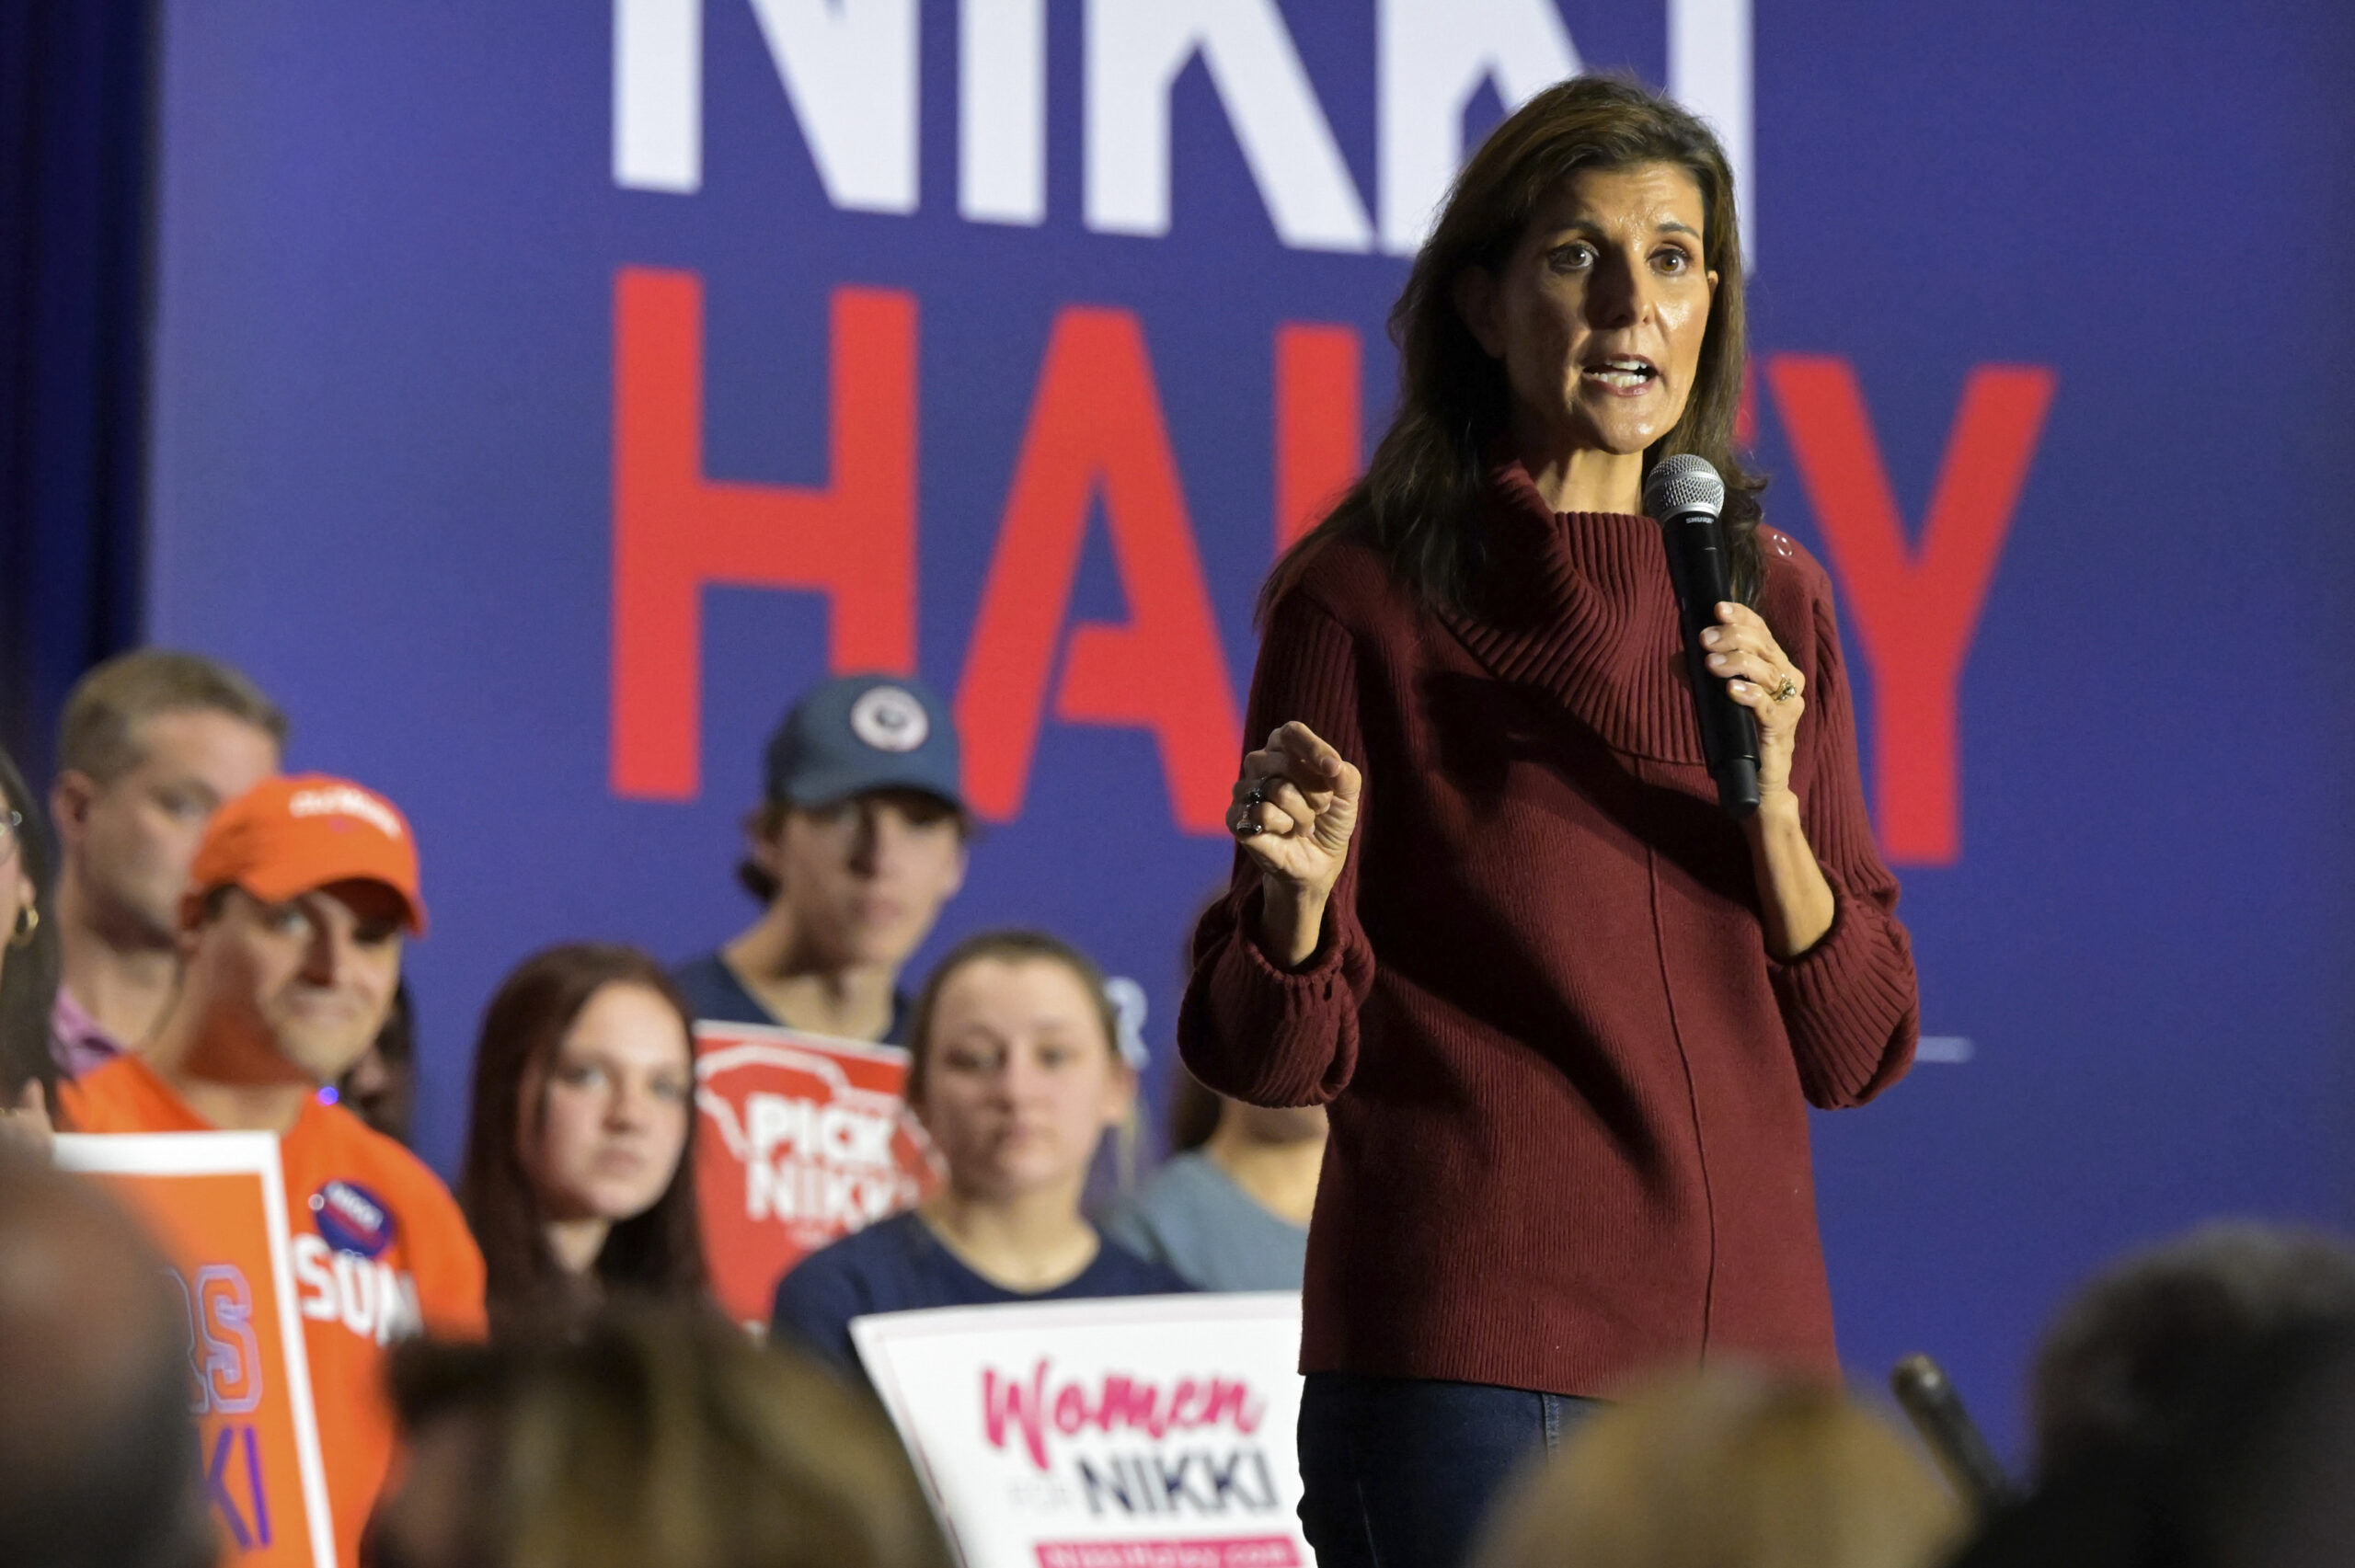 Nikki Haley: ‘Take out’ foreign leaders behind drone strike in Jordan